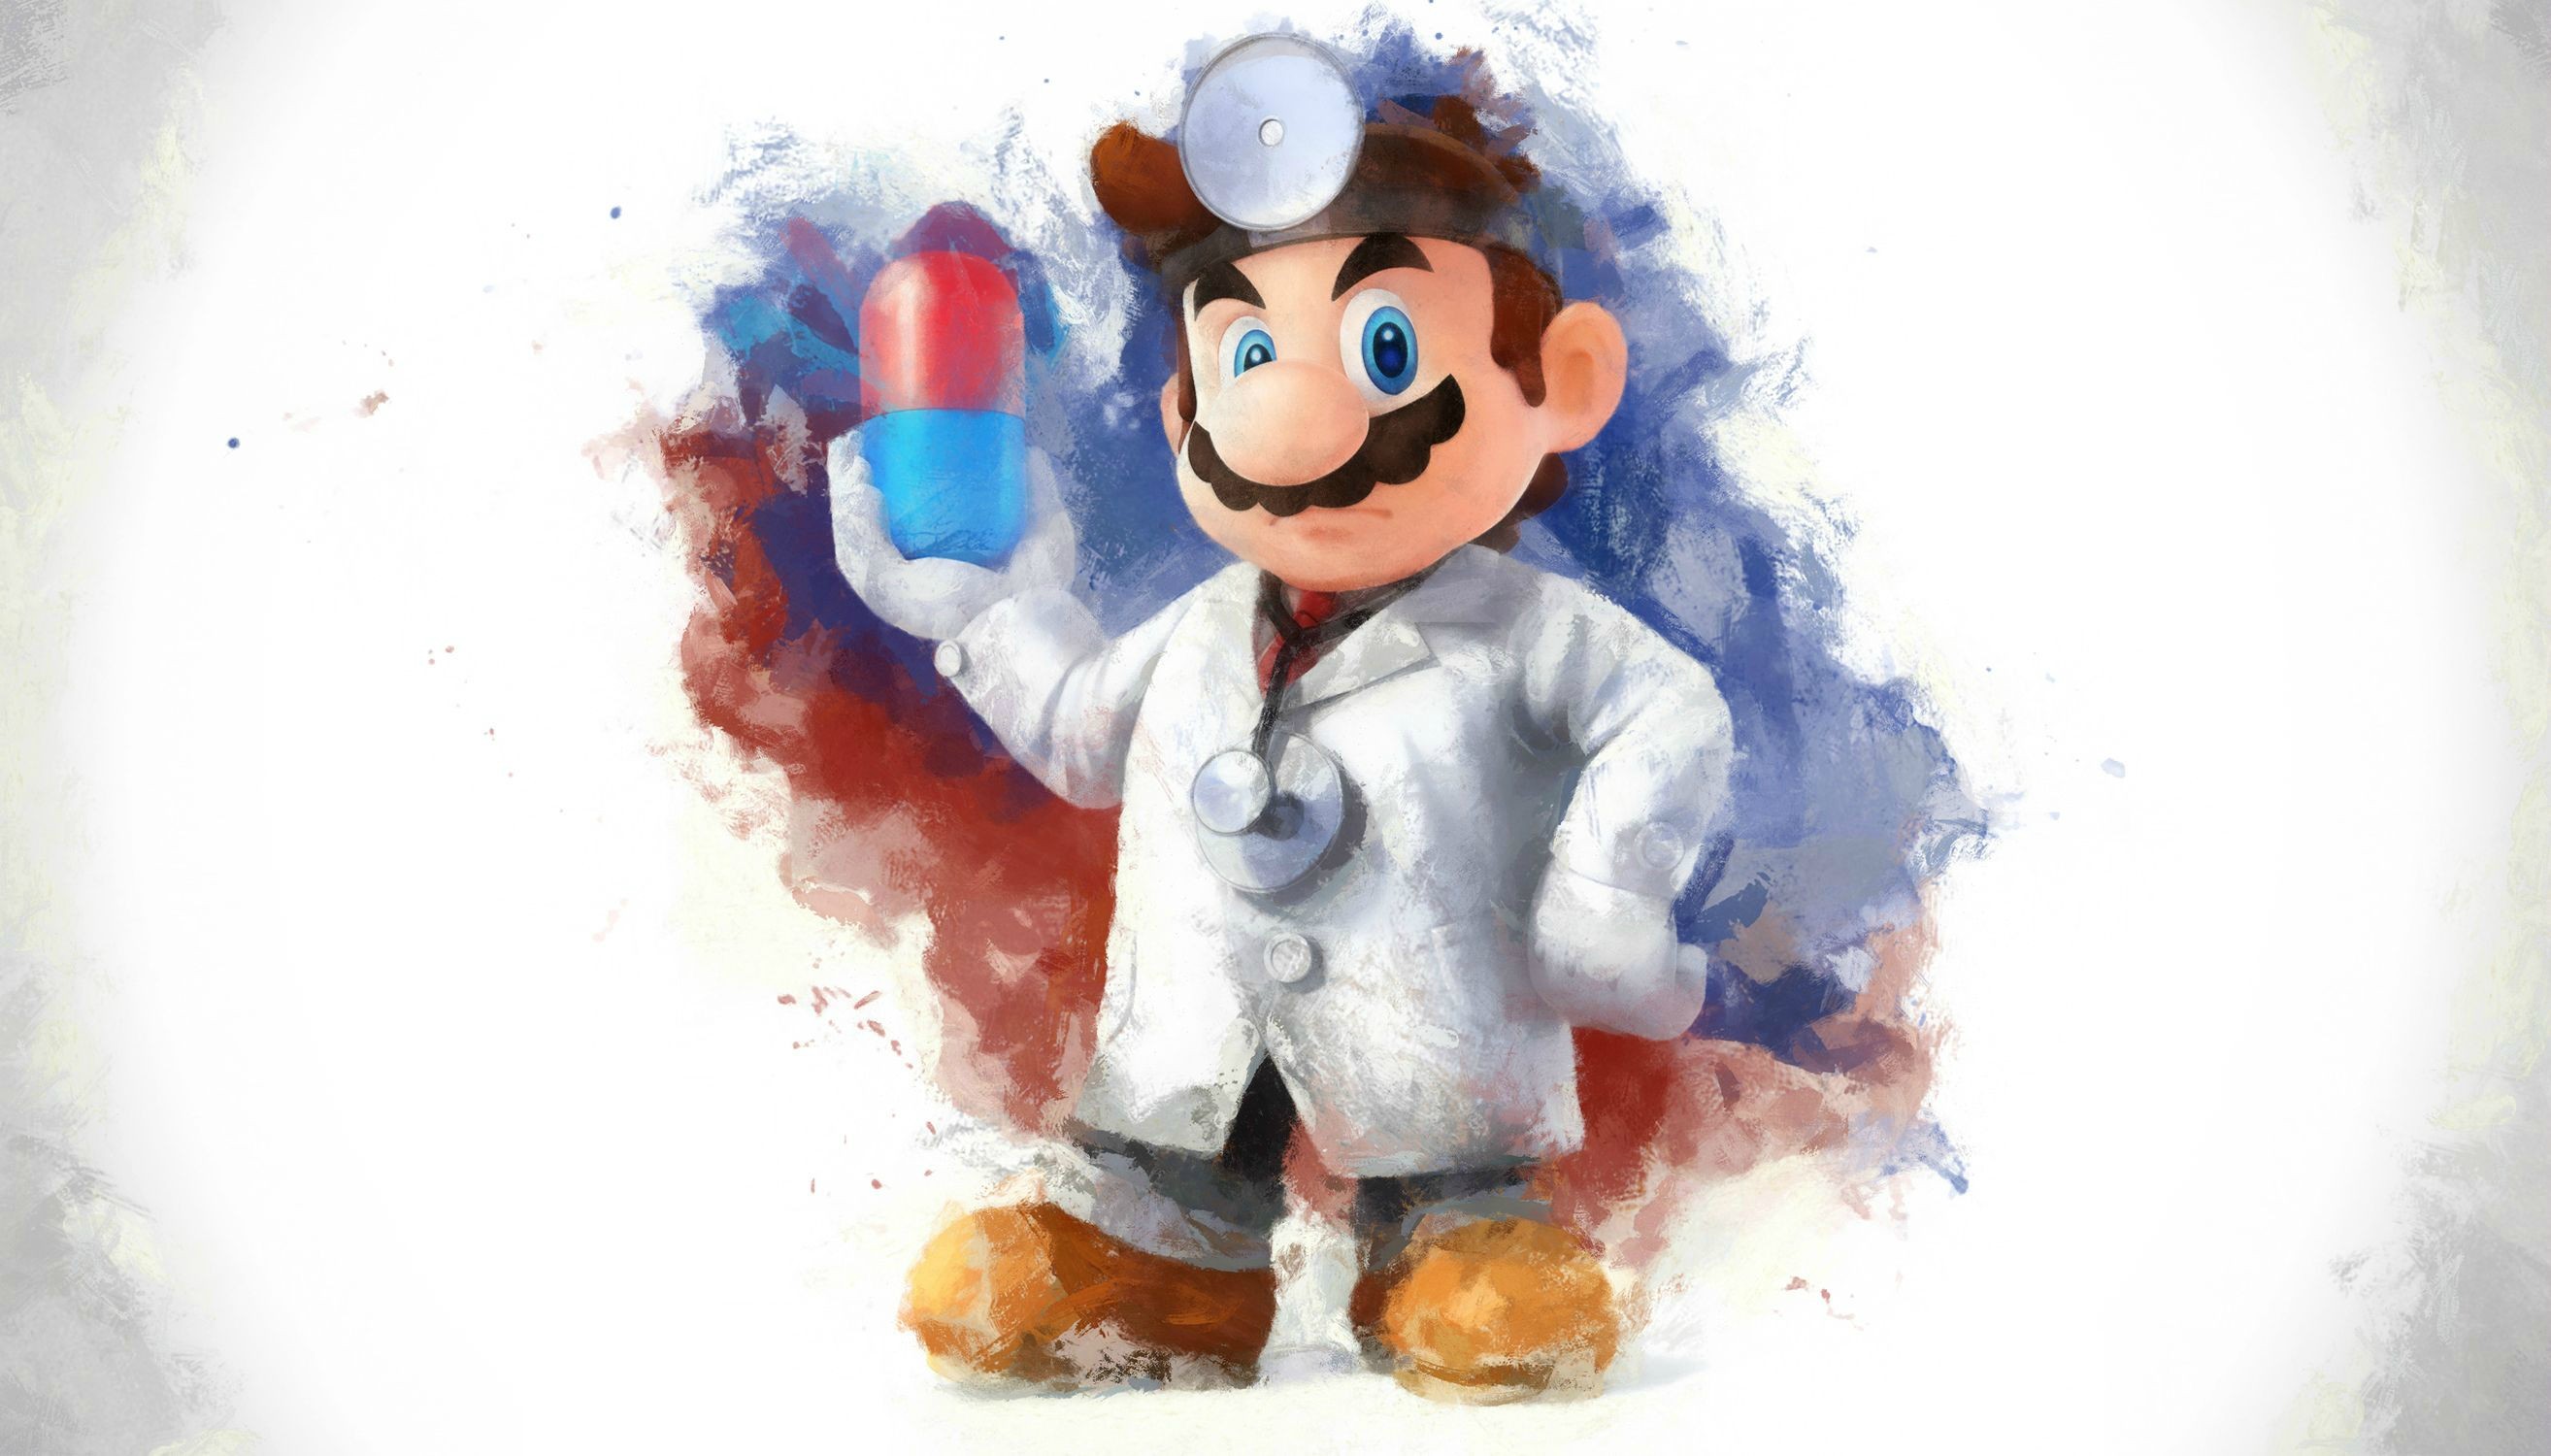 Video Game Heroes Video Games Mario Character Video Game Art 2628x1500